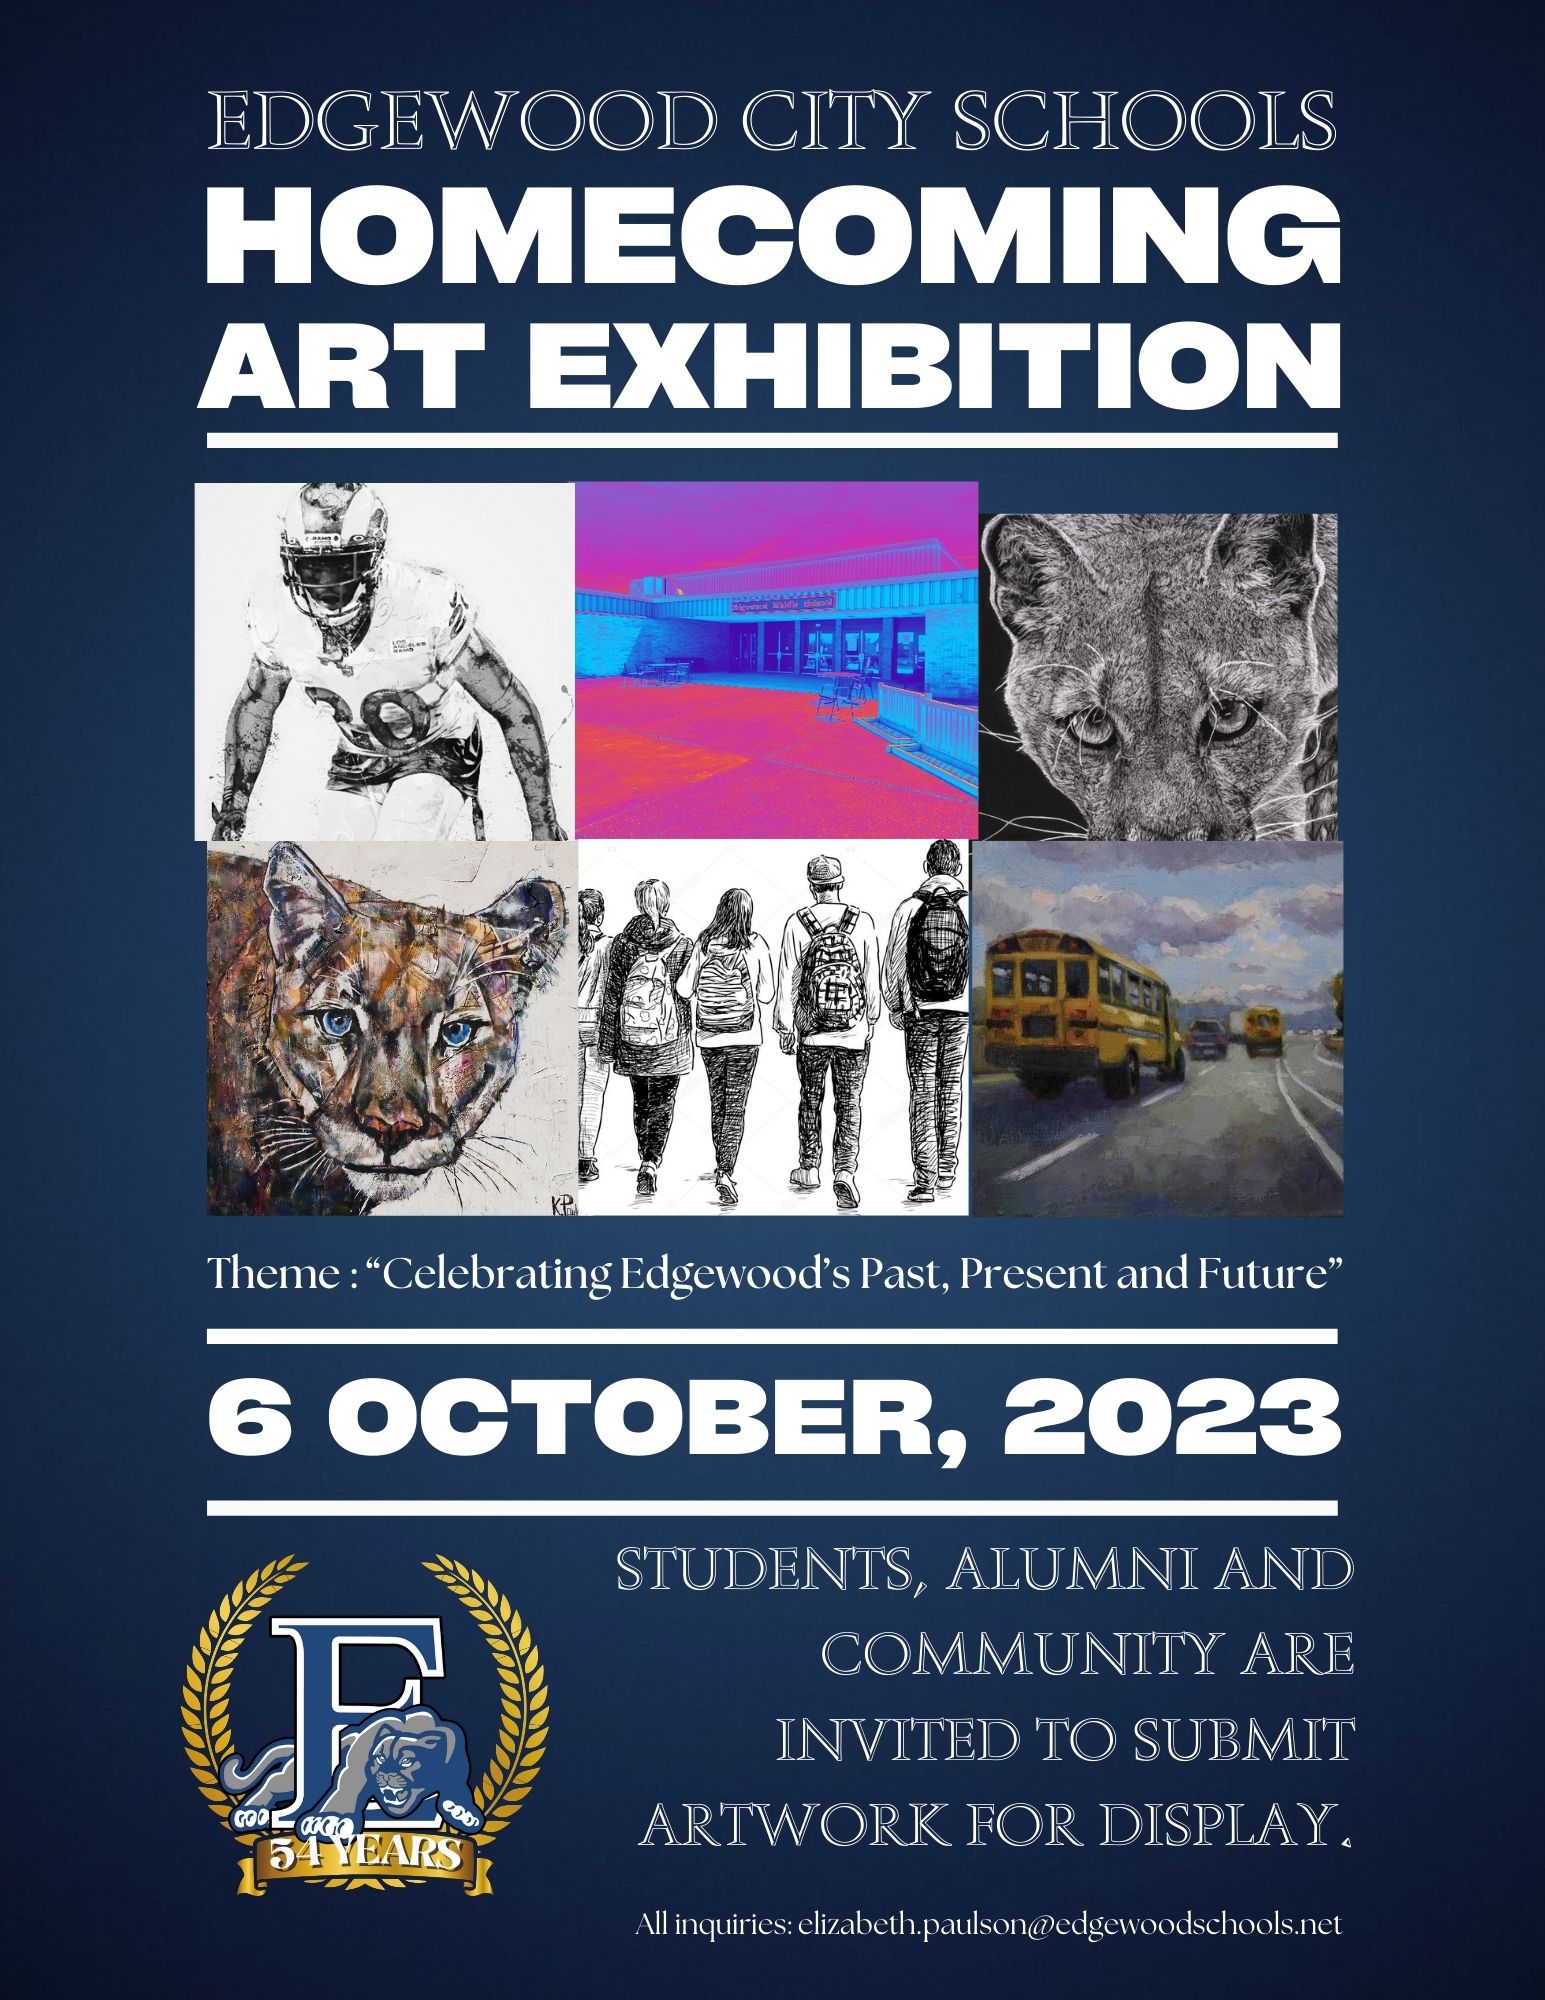 art expo details for October 6th, 2023 homecoming 